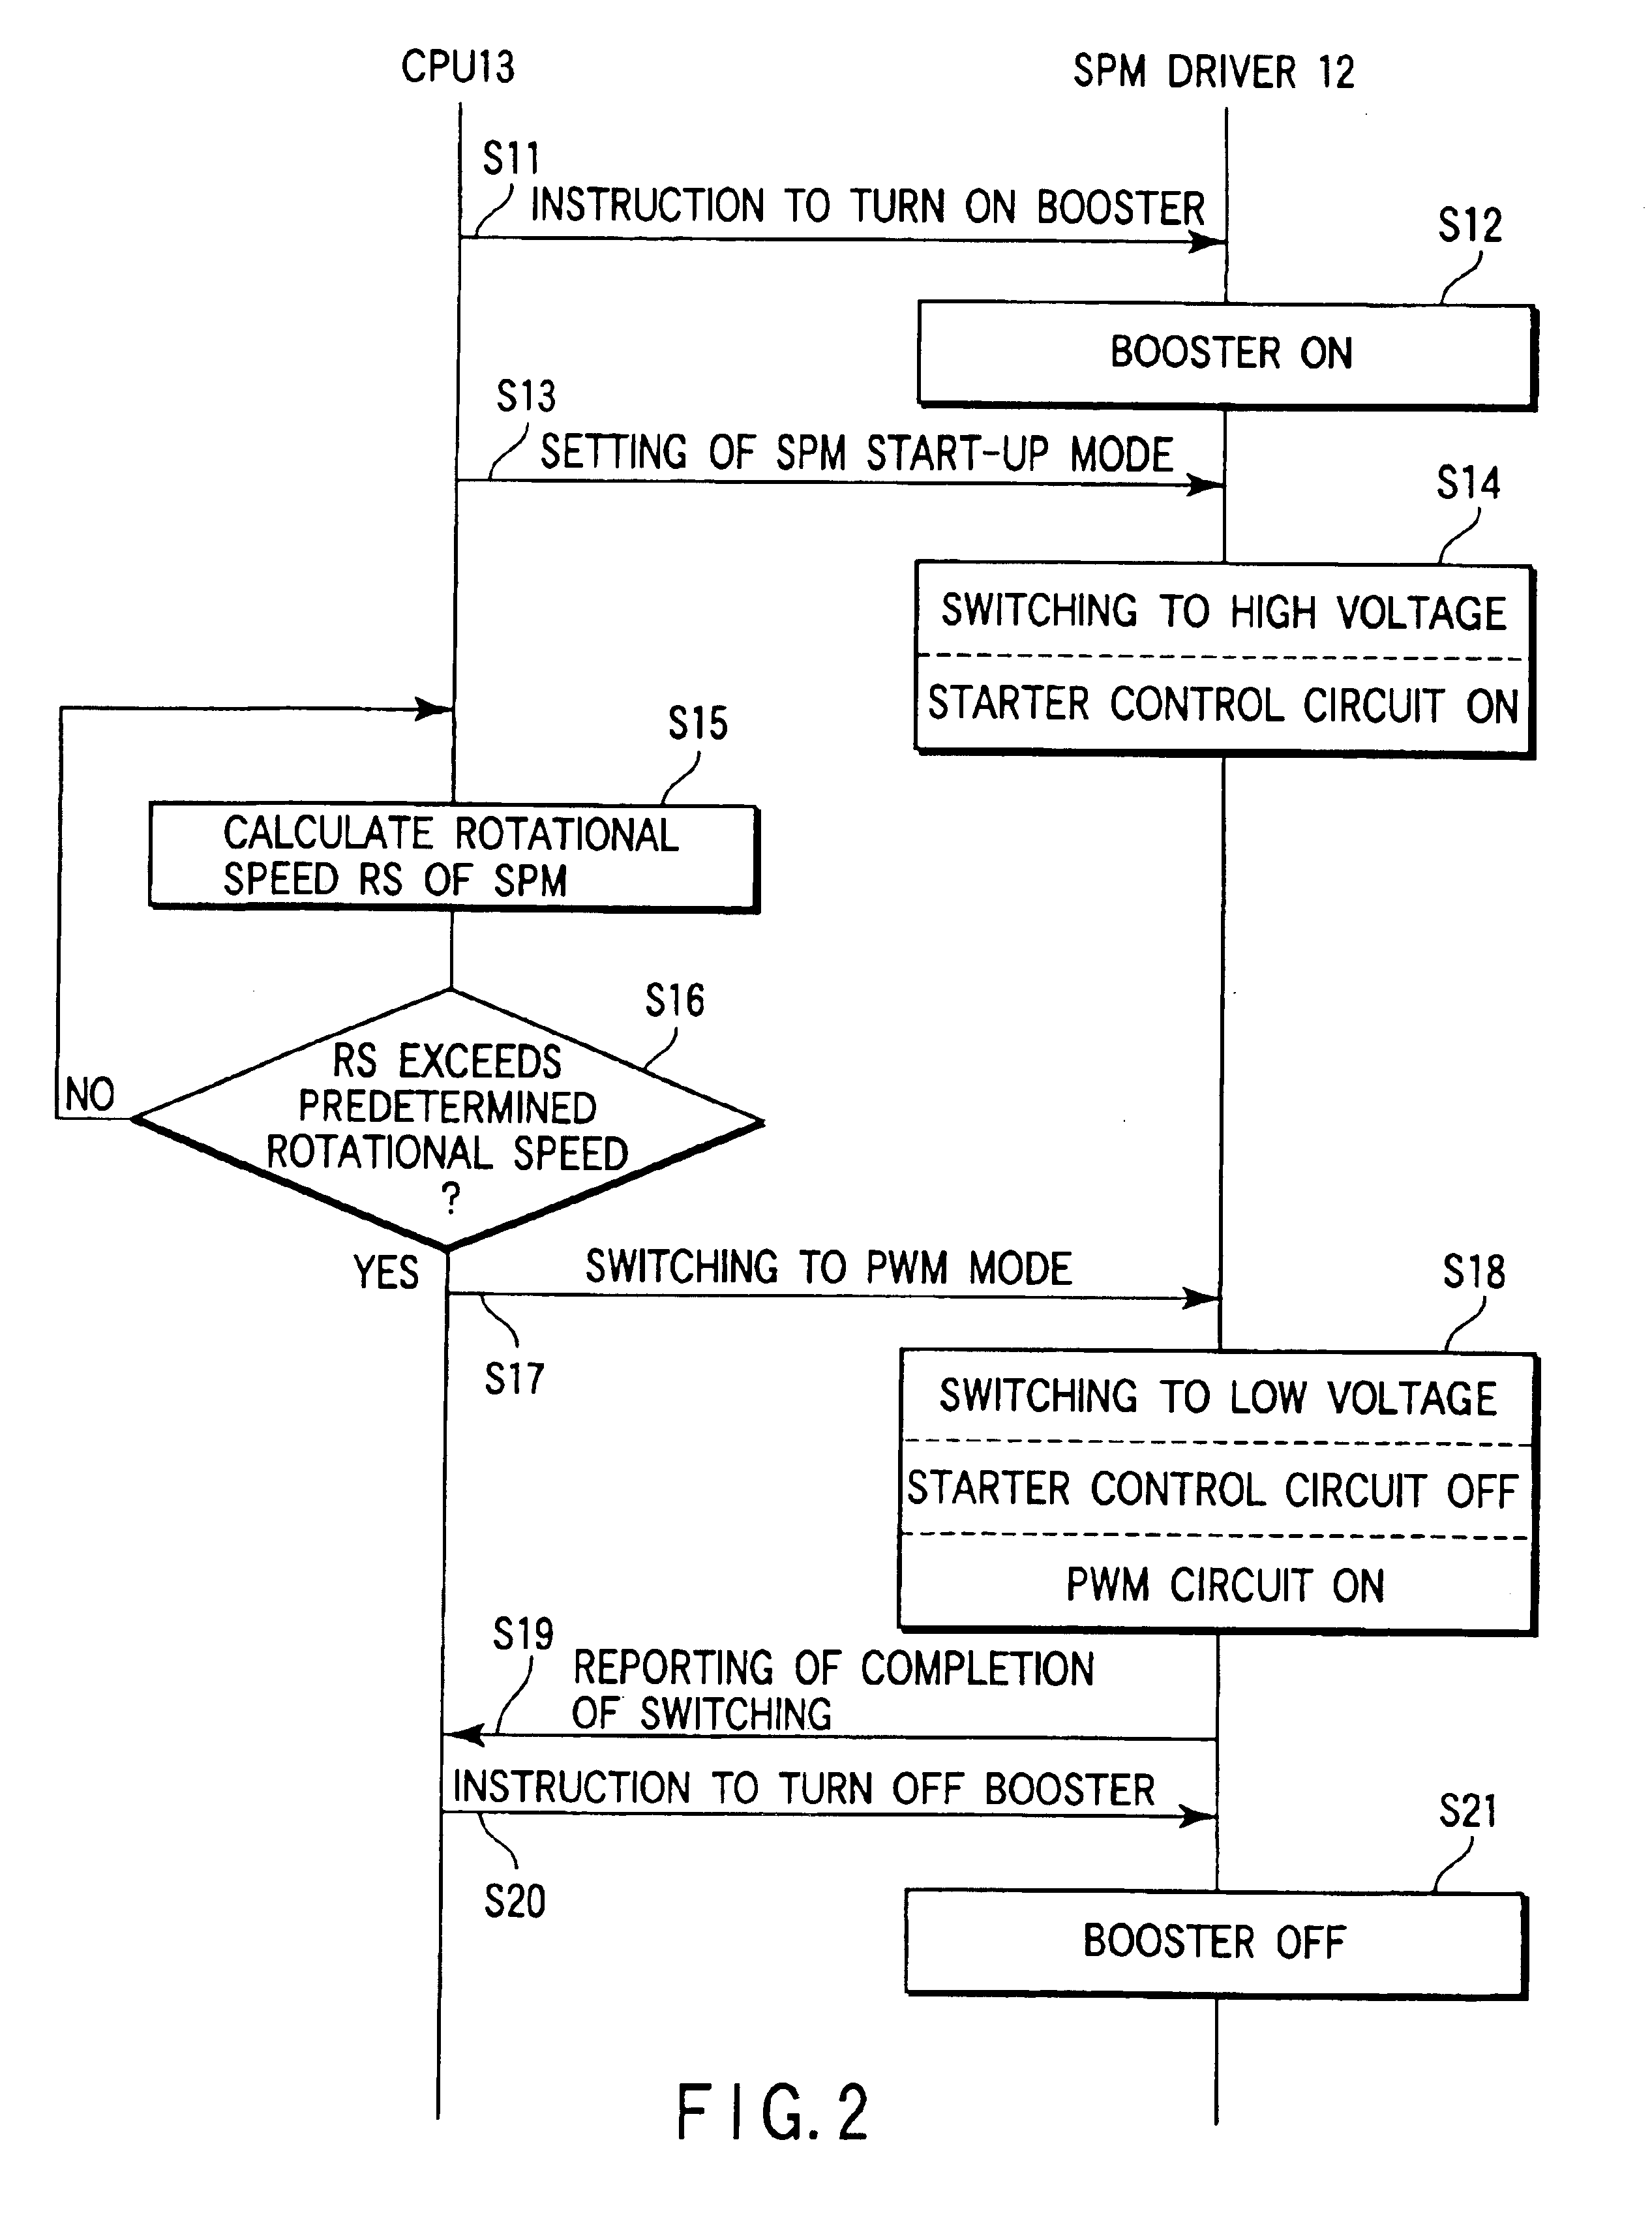 Apparatus and method used in disk drive for driving spindle motor